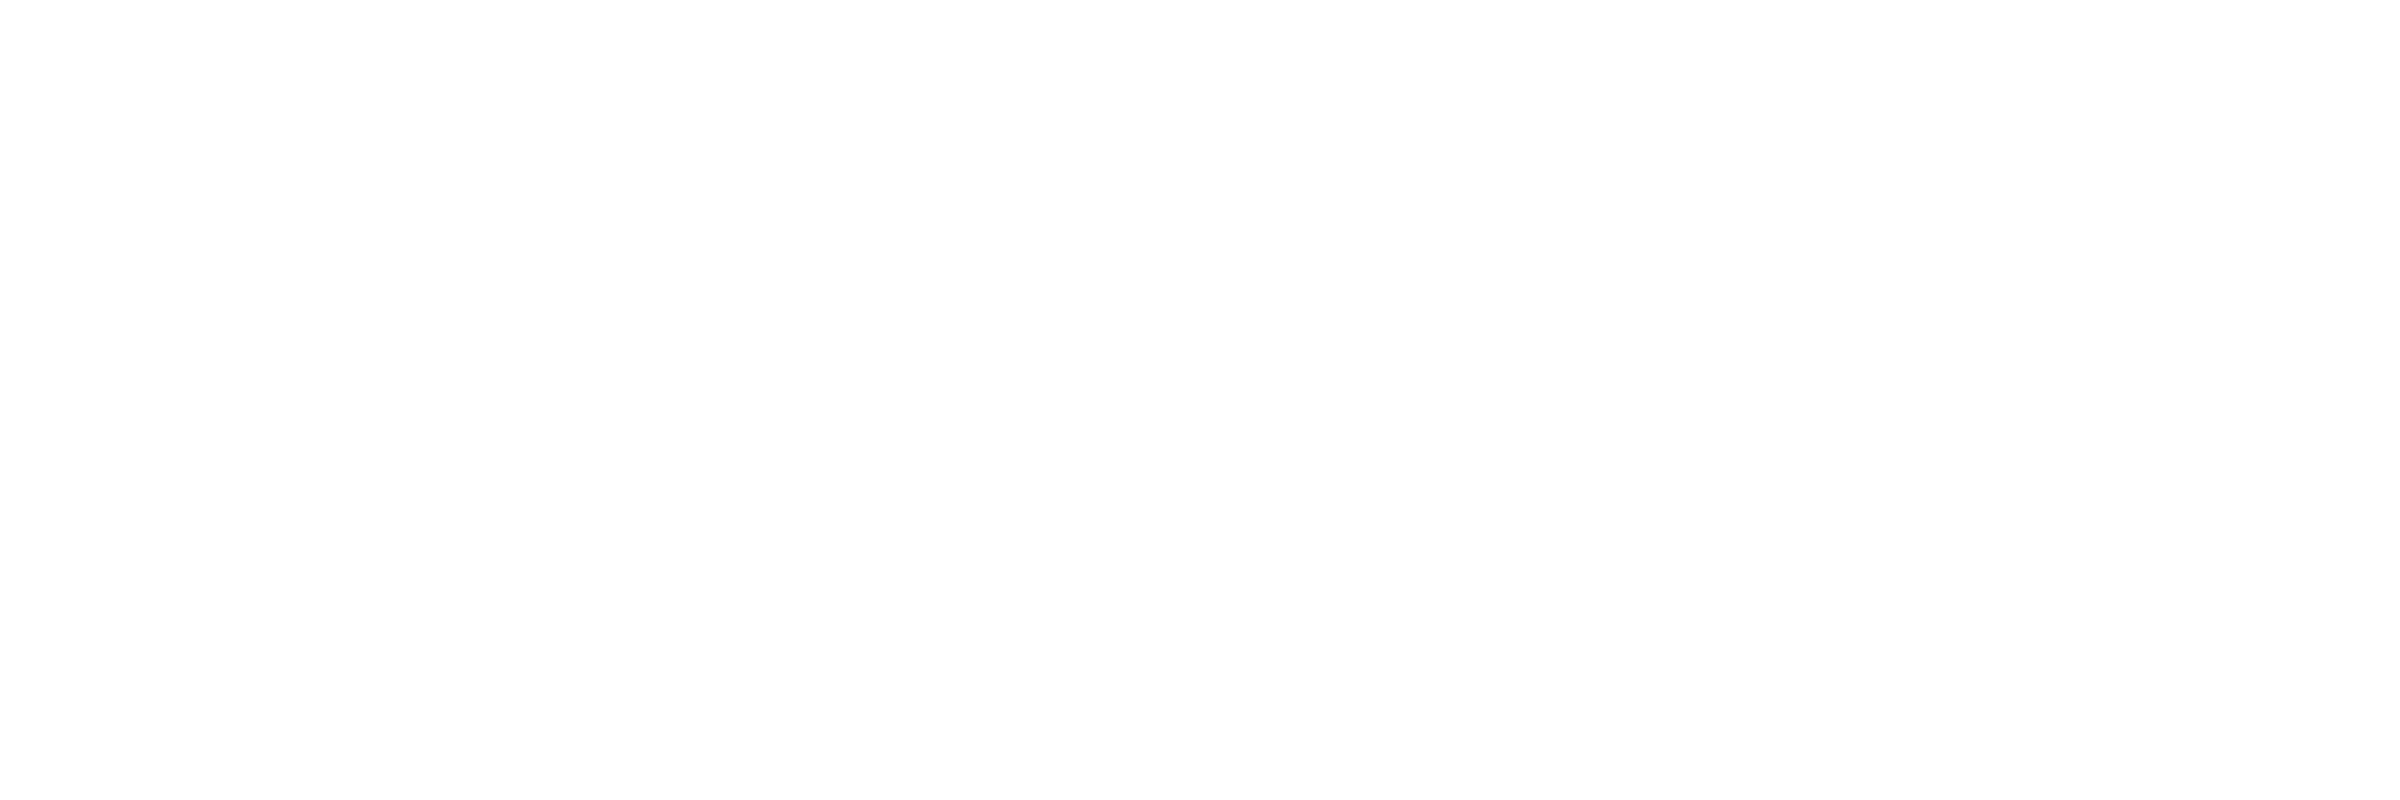 Rep Force Jaberdasti Video - bodyright - Own your body online | Bodily Integrity | UNFPA